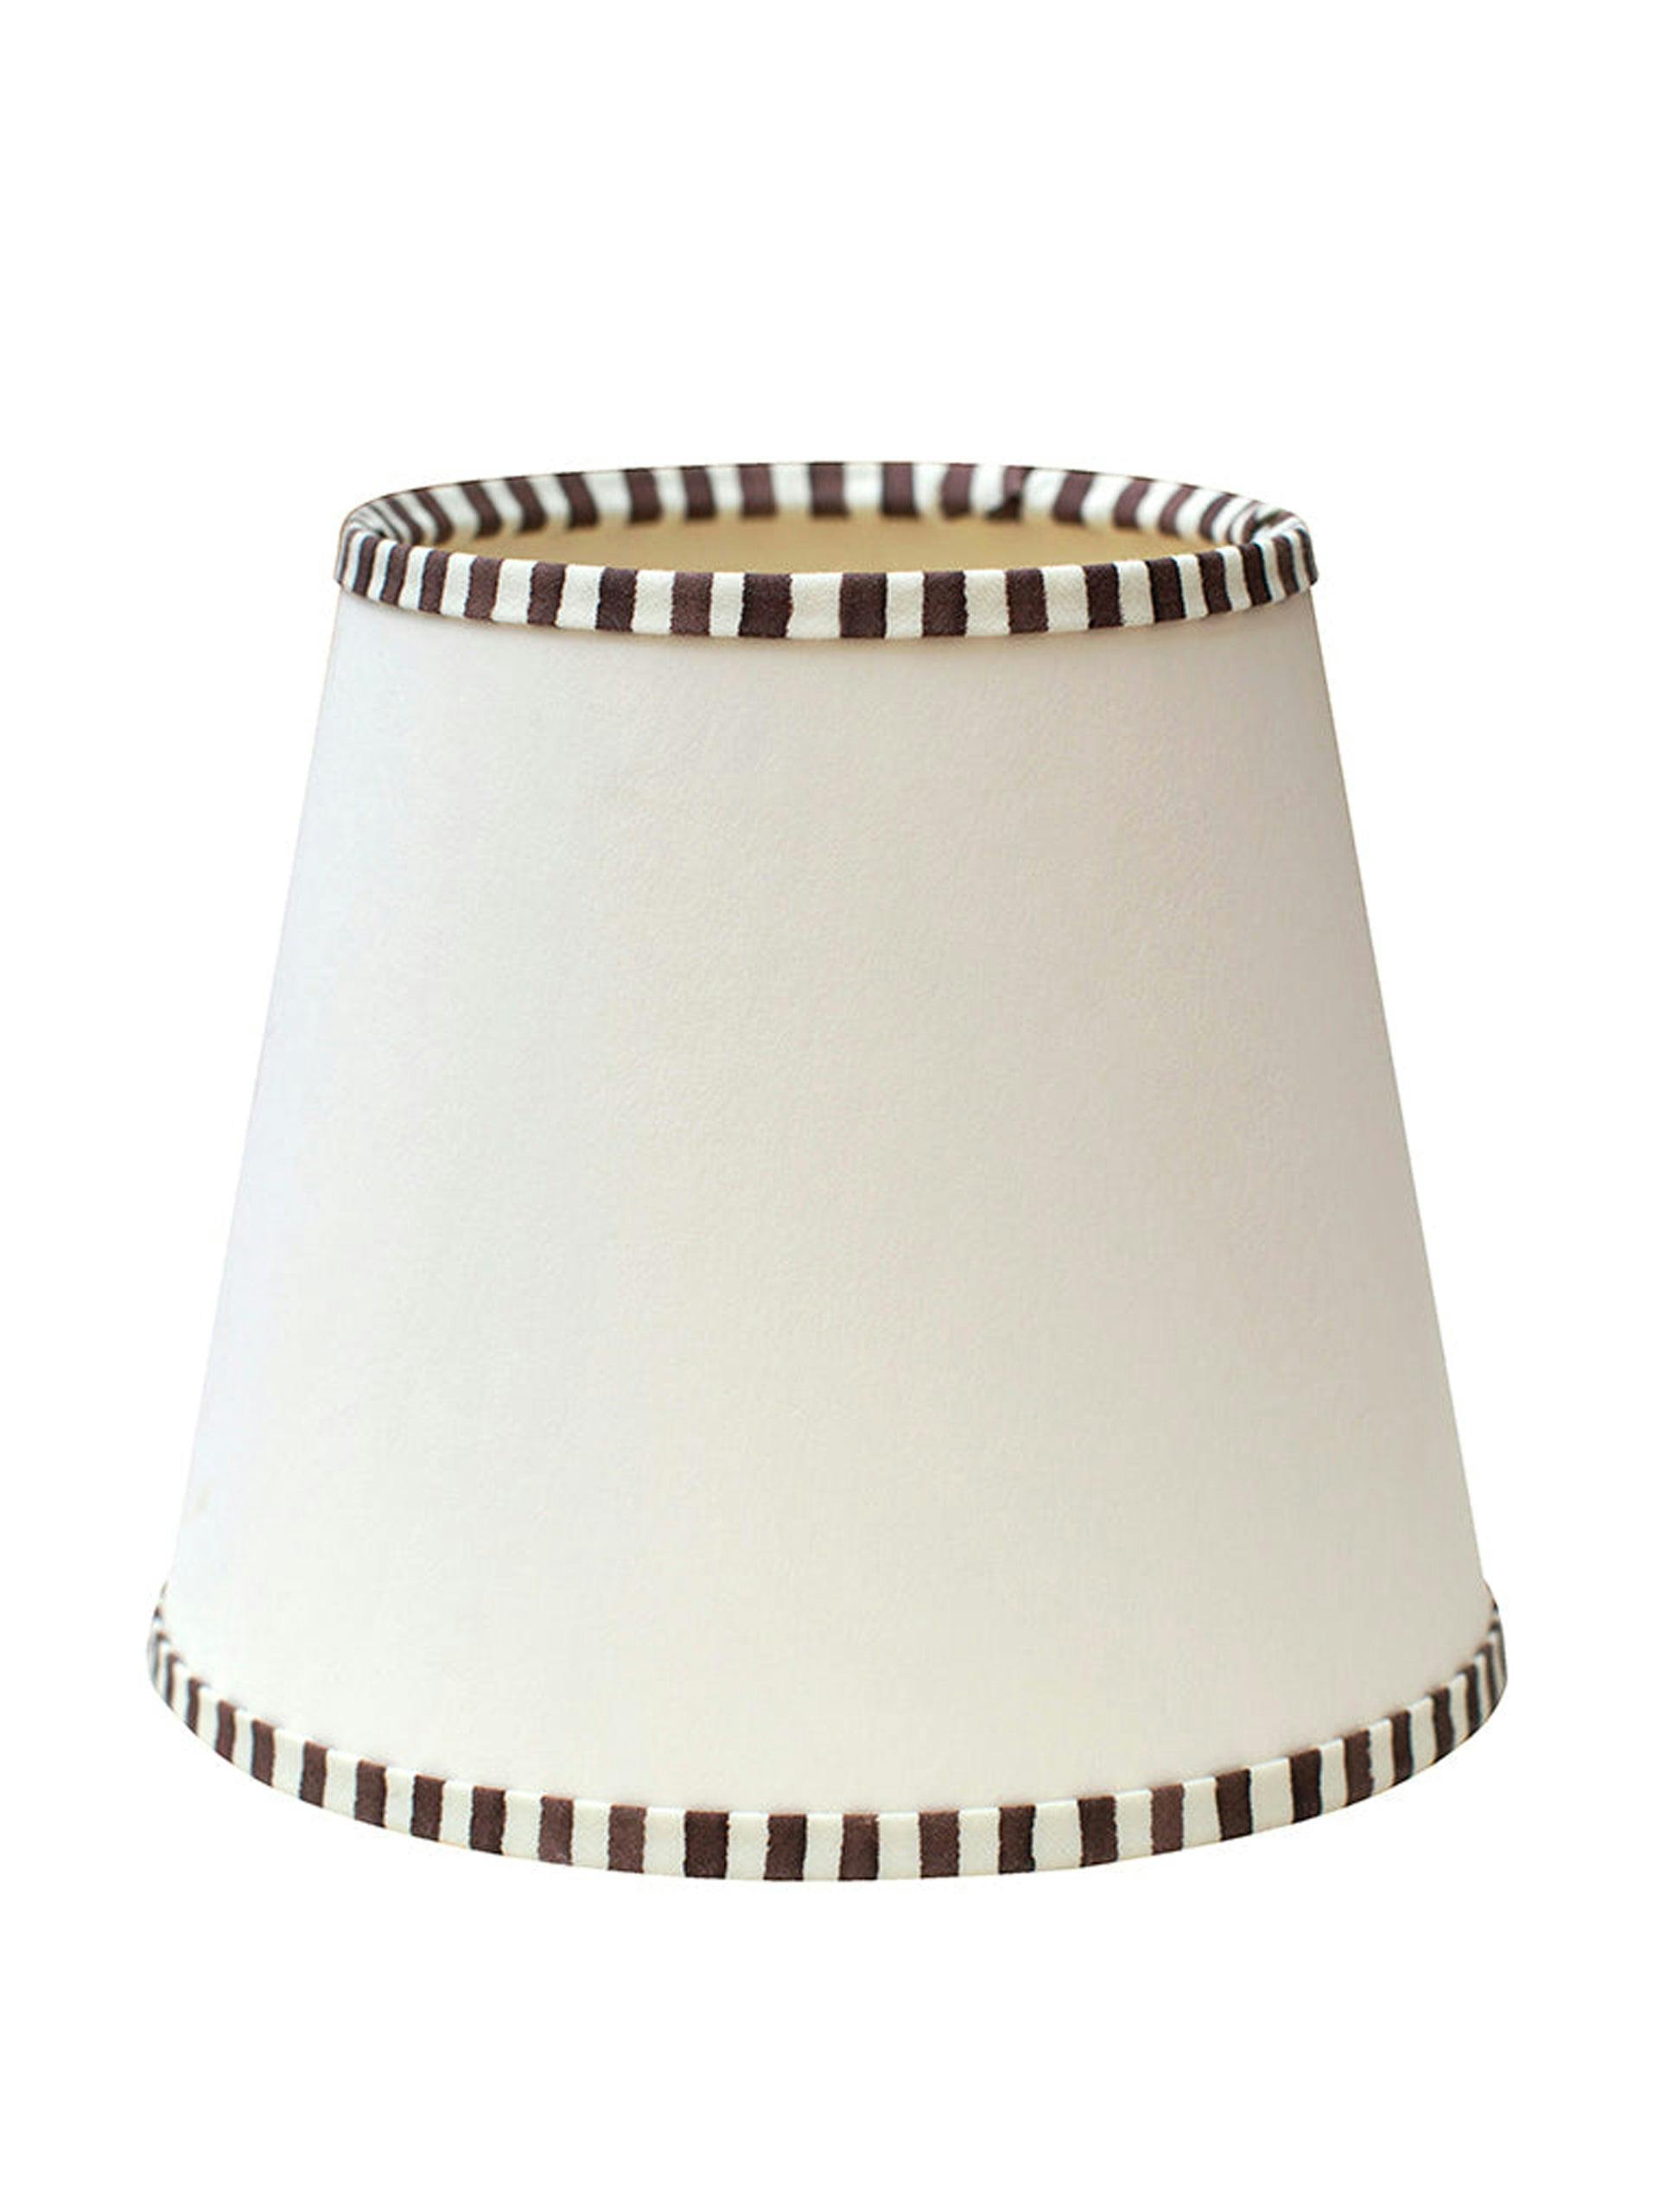 Striped brown and cream lampshade